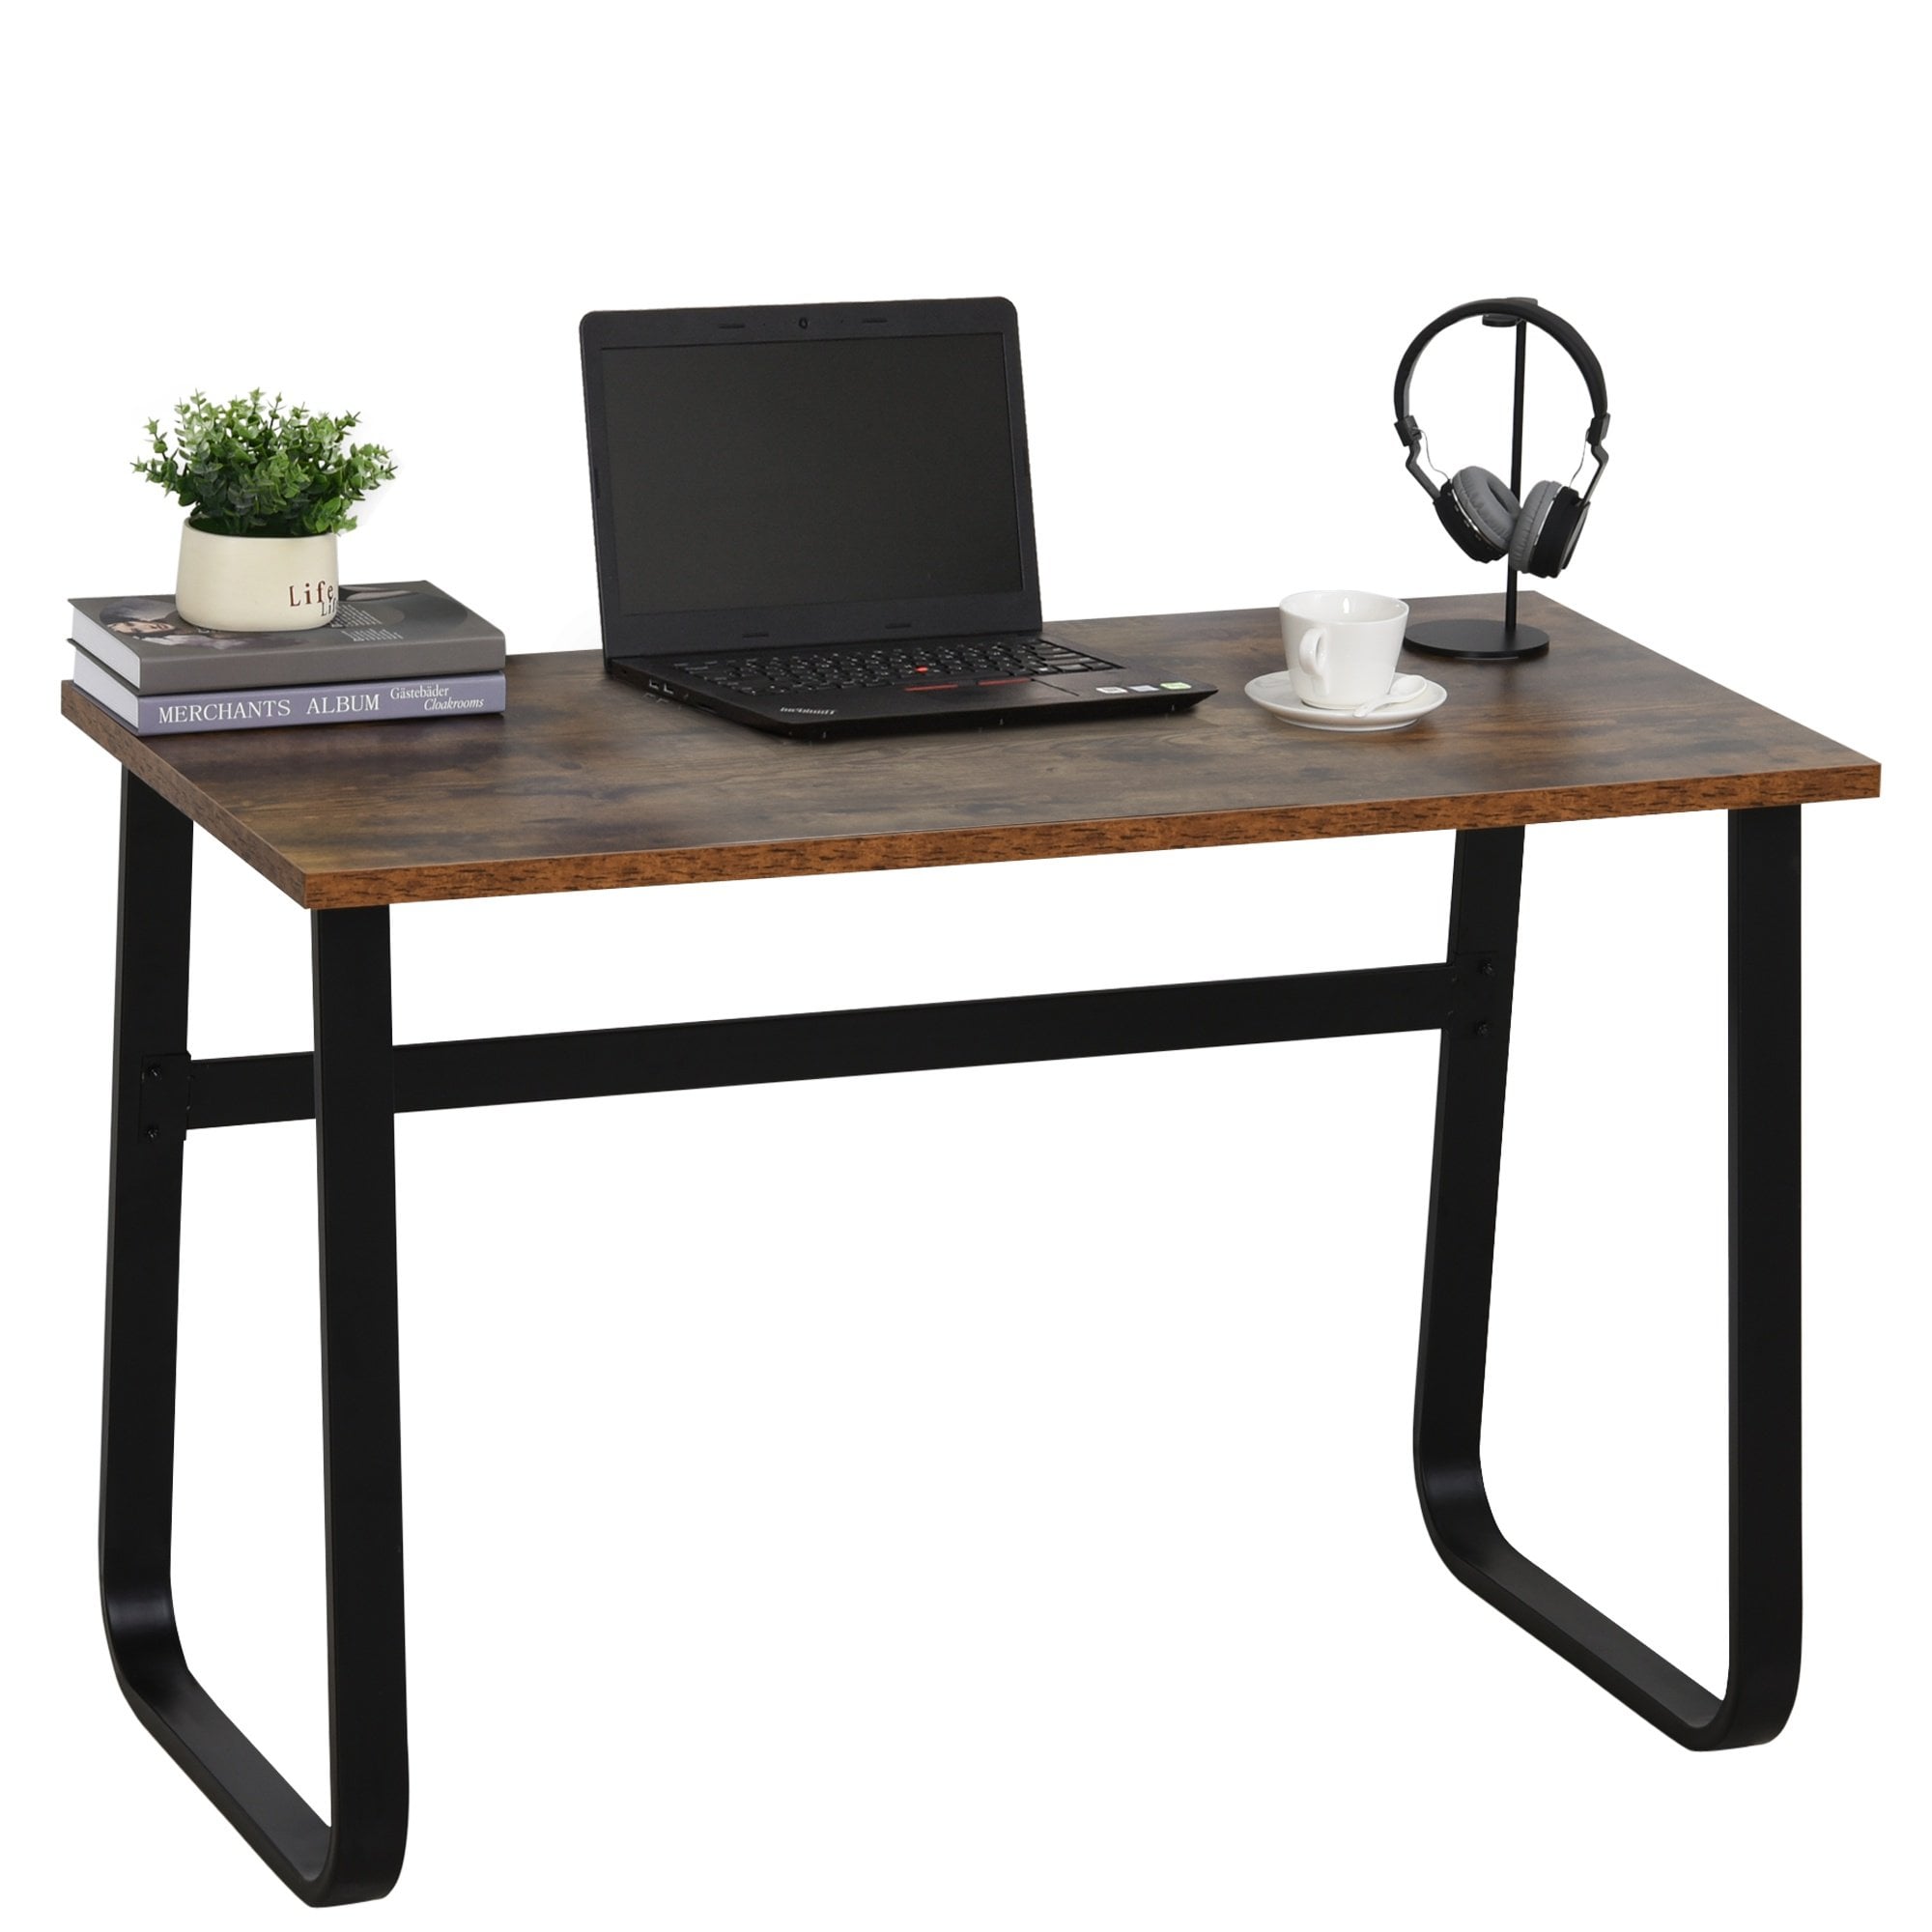 Writing Desk Workstation Center Laptop Table Industrial Design Furniture for Home Office Study Use Simple Metal Legs - CARTER  | TJ Hughes